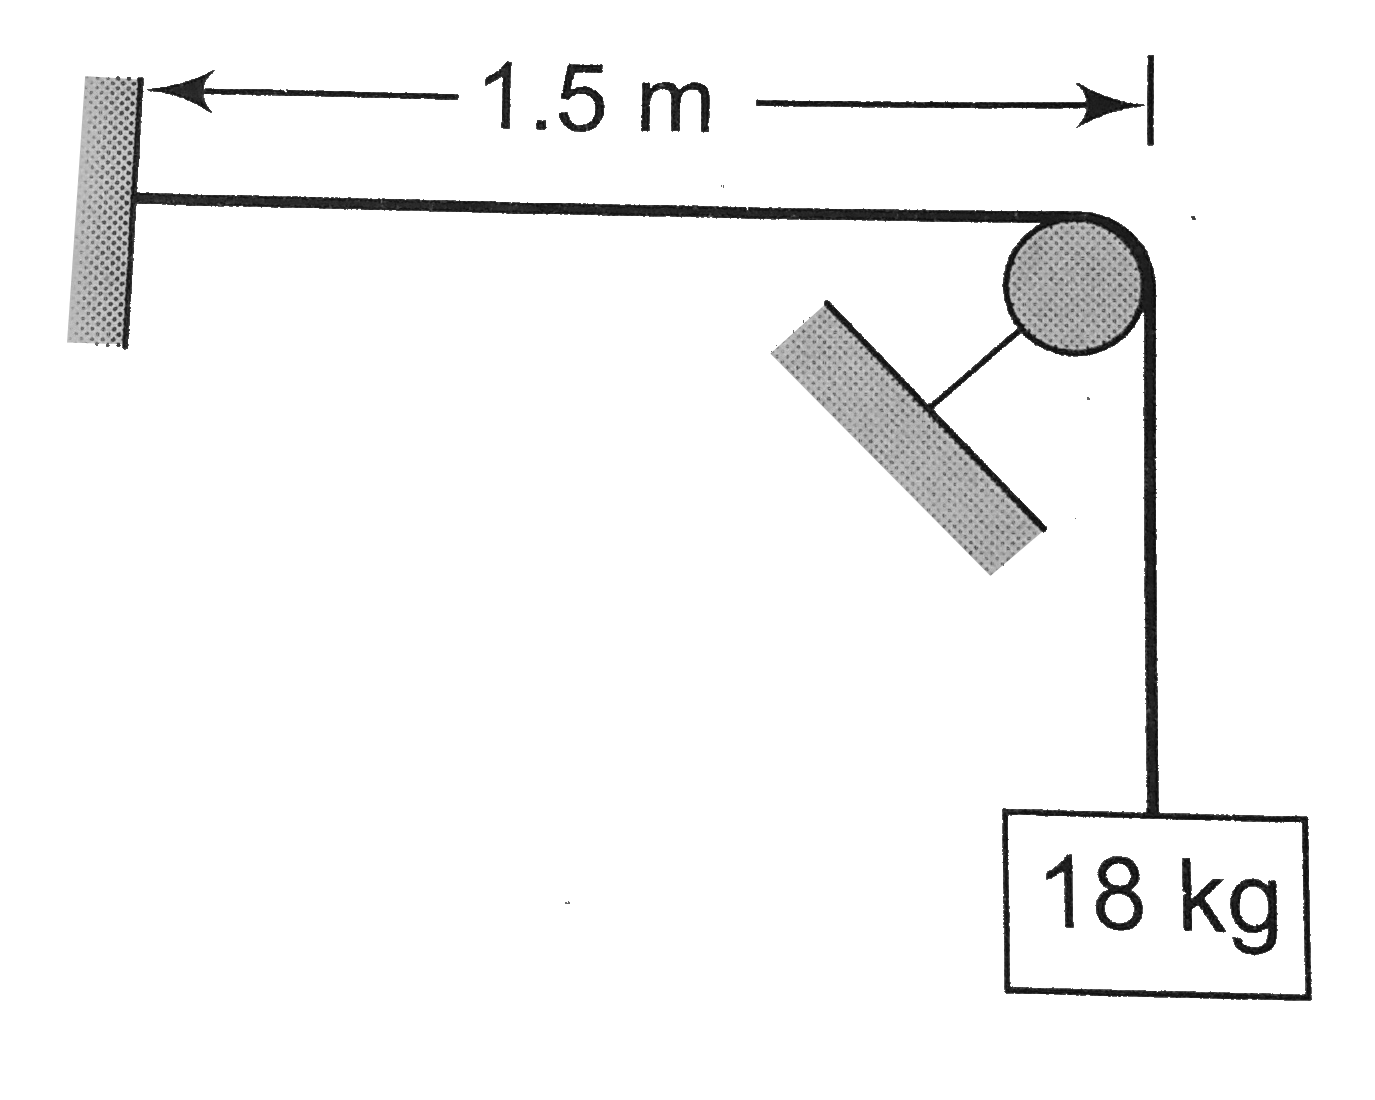 The length of the wire shown in Fig. Between the pulley and fixed support is 1.5m and mass is 12.0g the frequency of vibration with which the wire vibrate two loops leaving the middle point of the wire between the pulleys at rest is